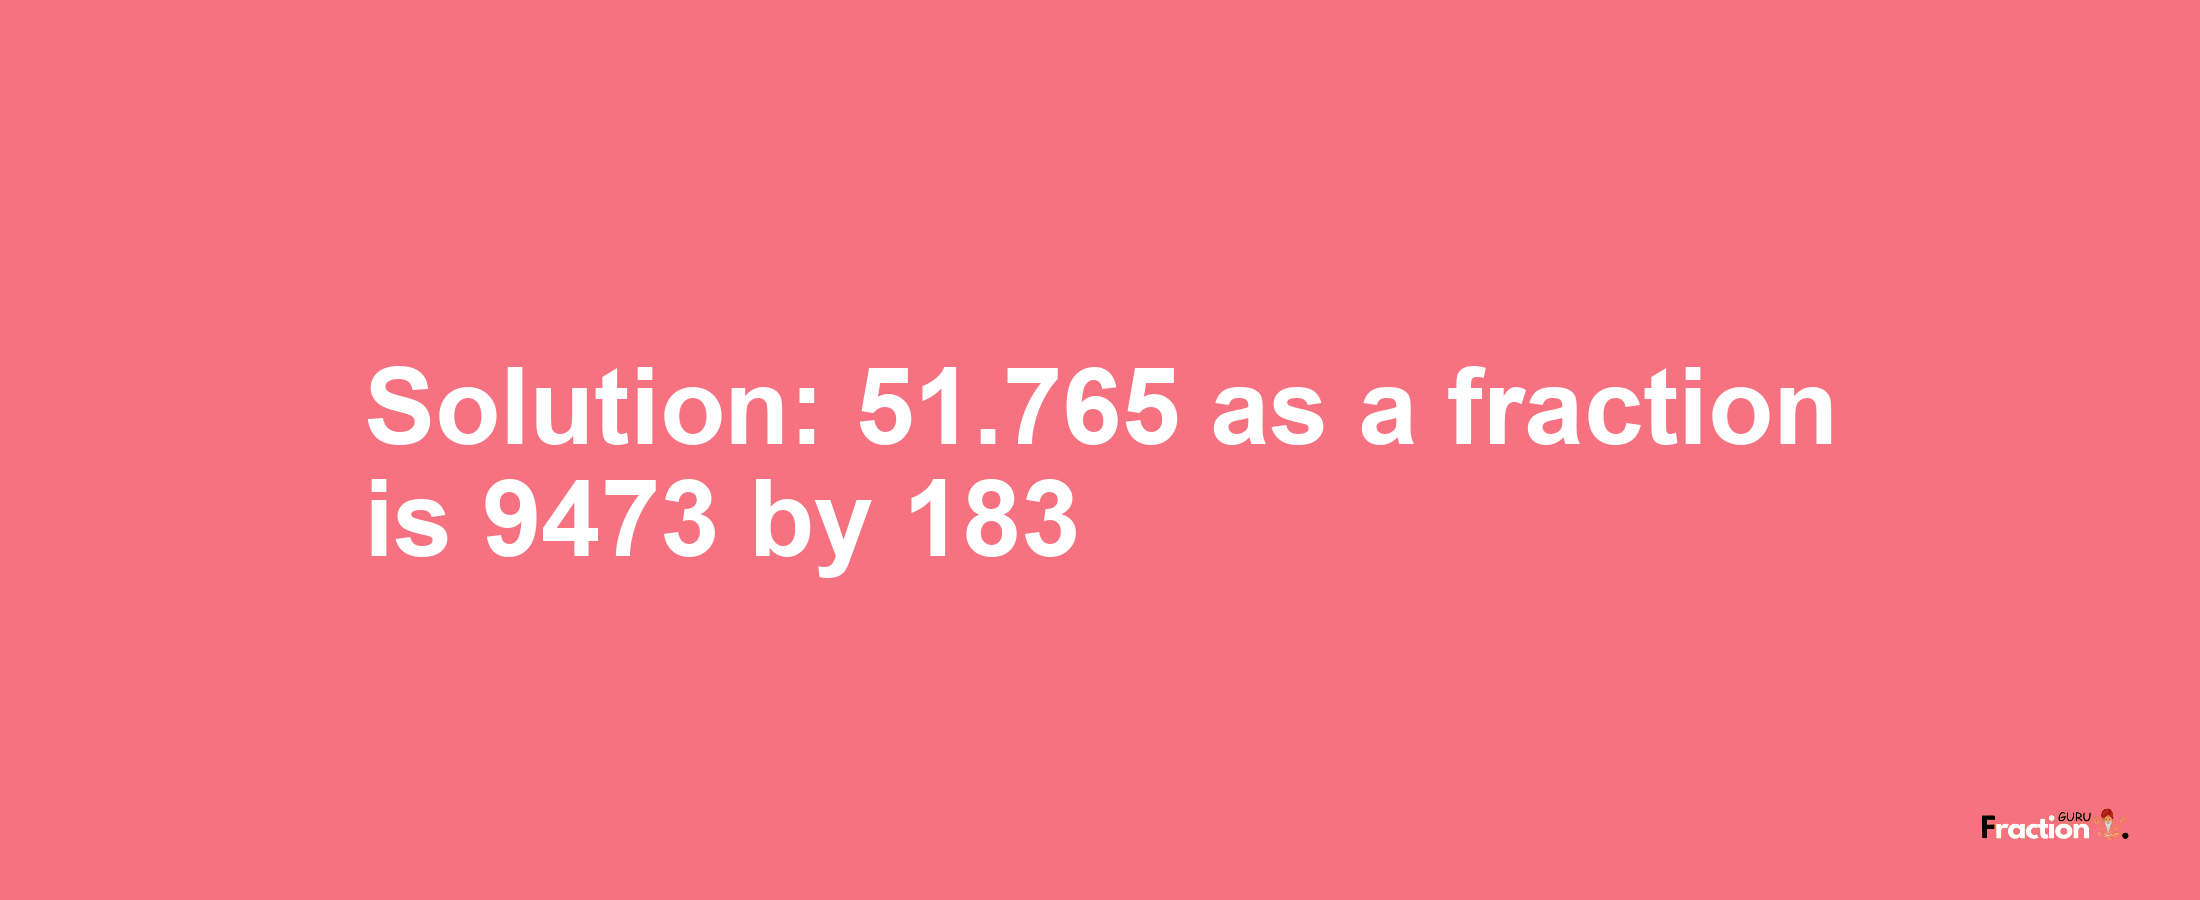 Solution:51.765 as a fraction is 9473/183